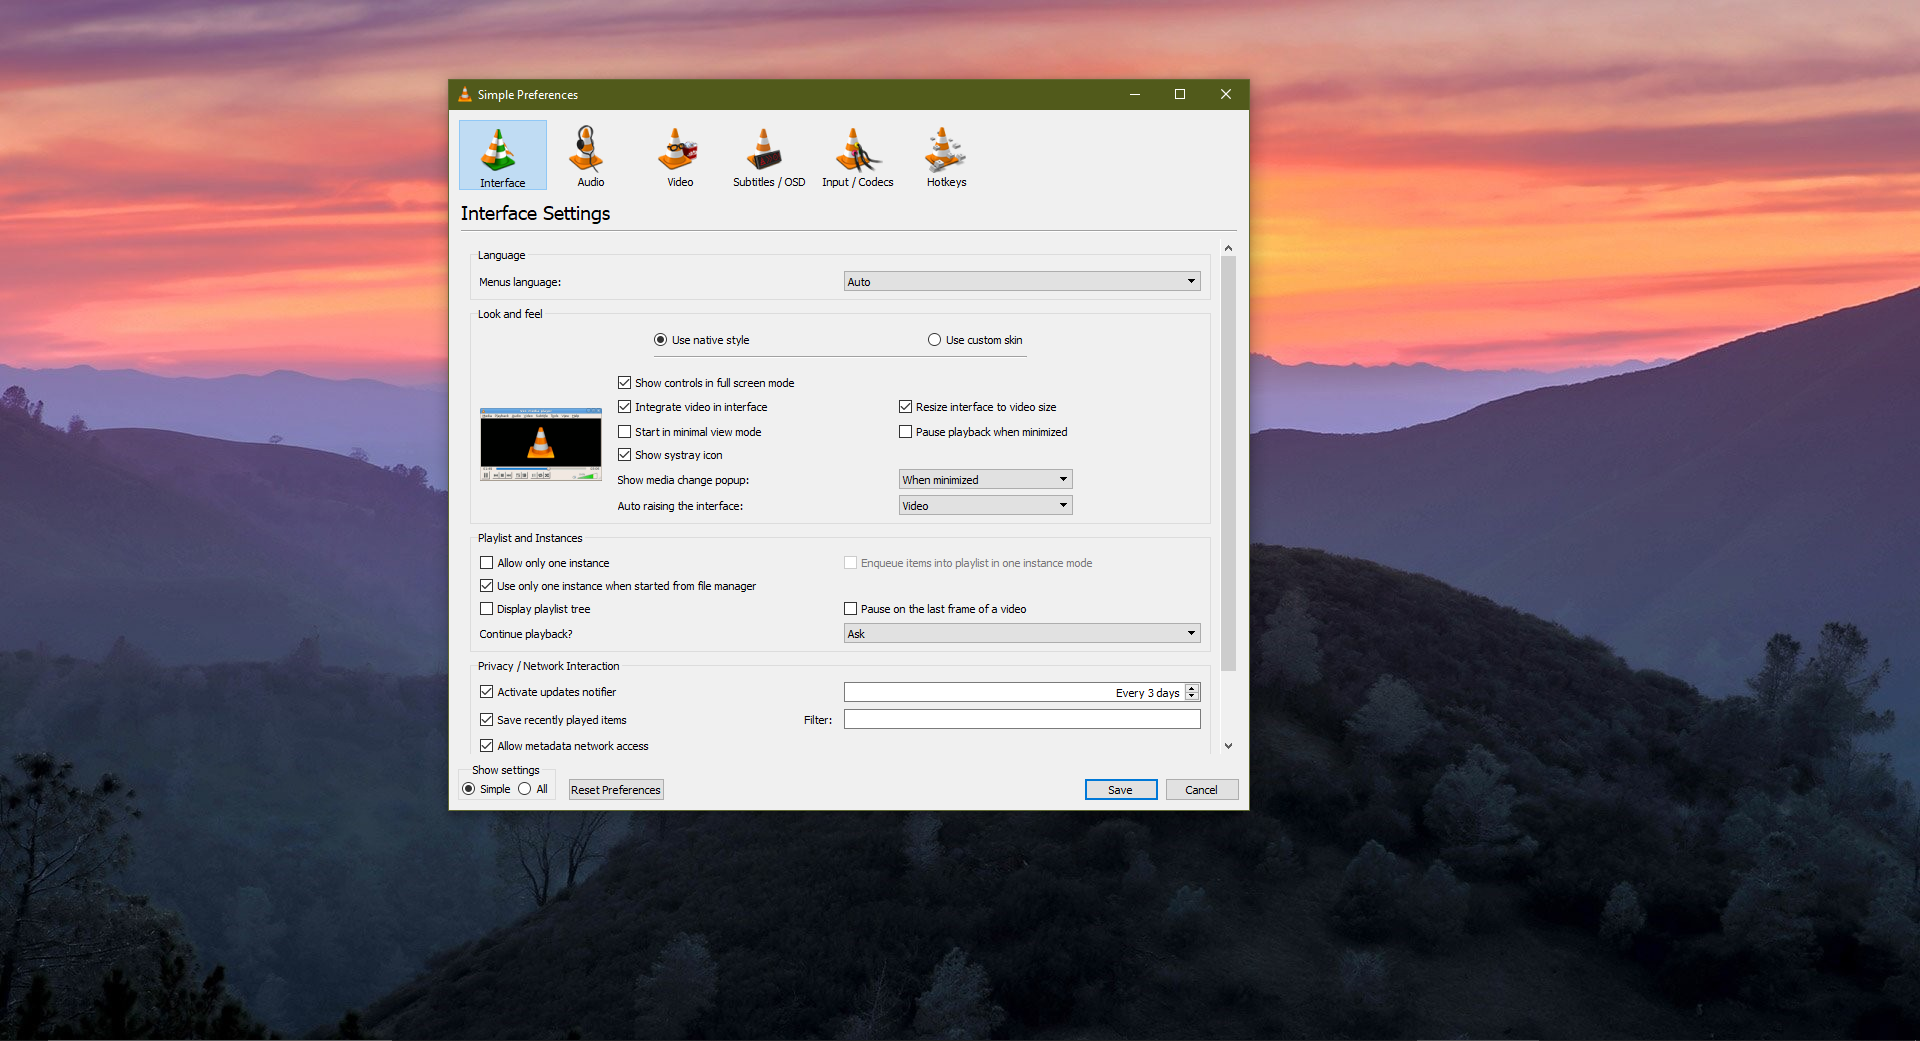 vlc player multiple windows in osx